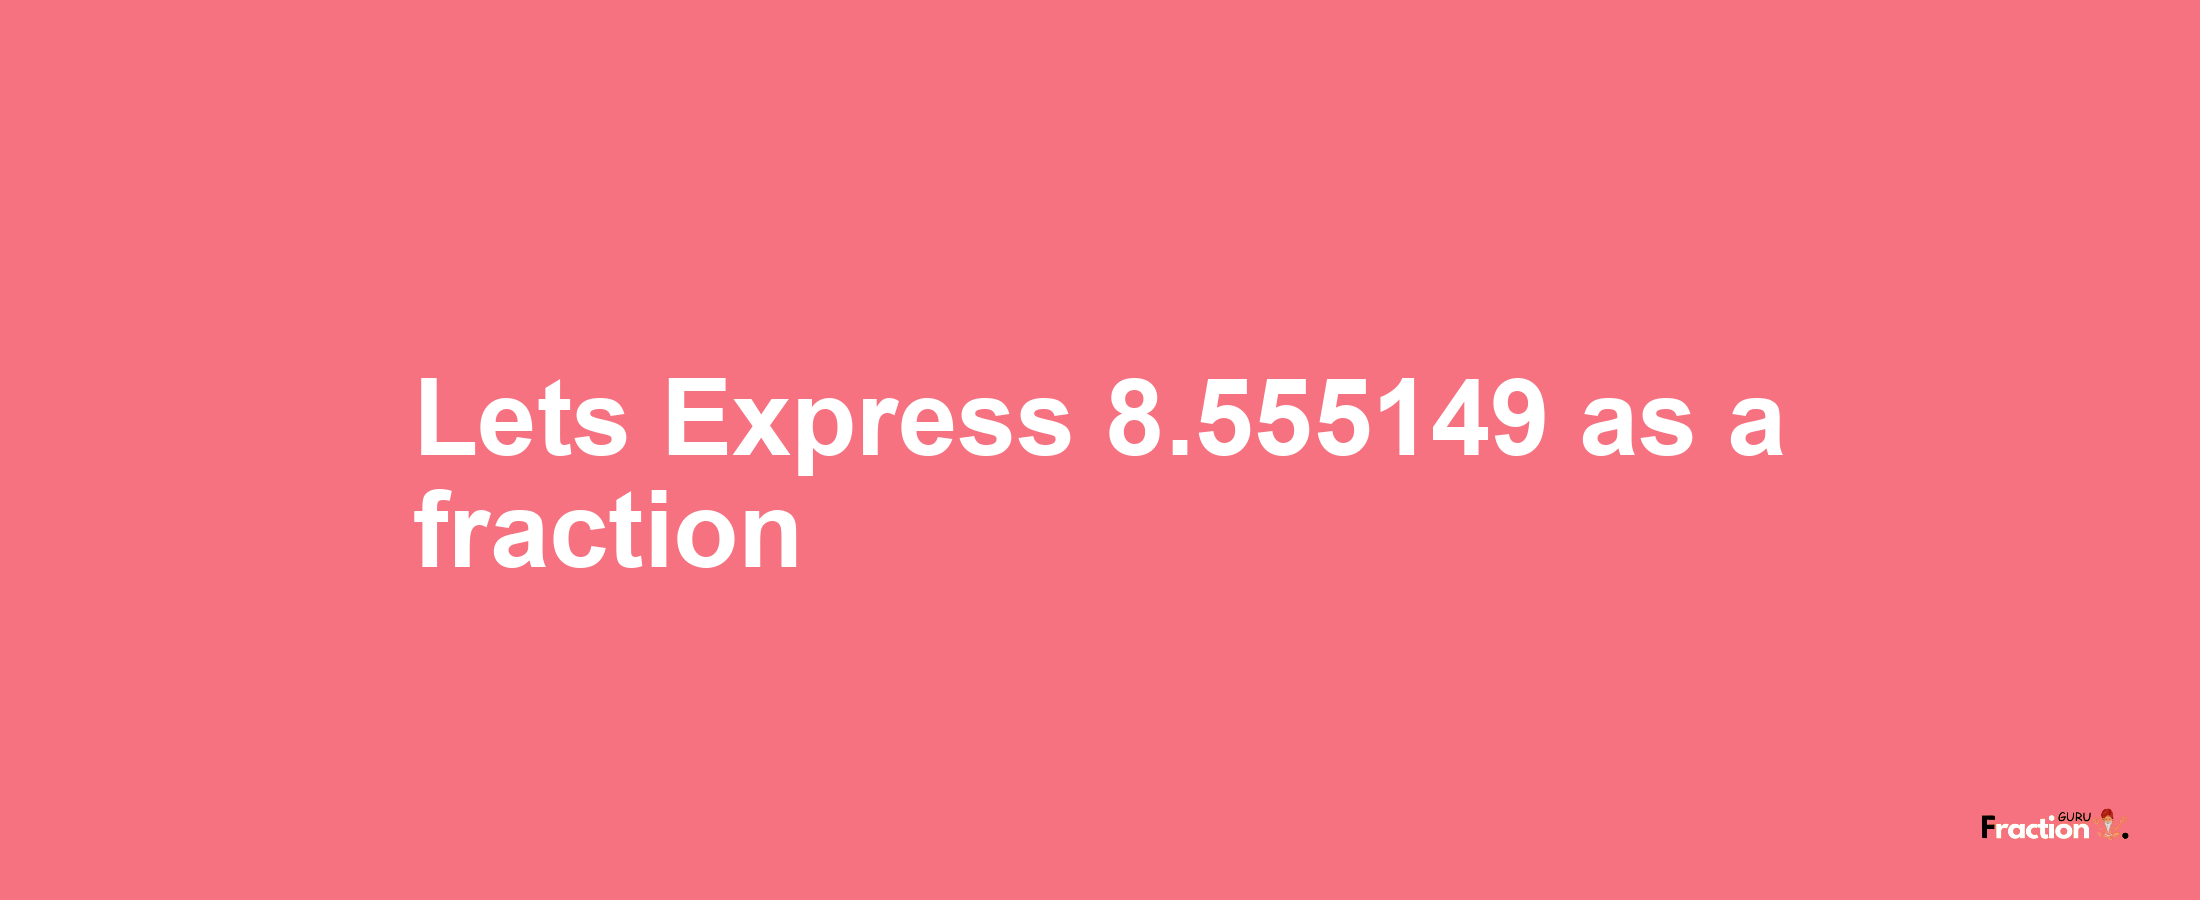 Lets Express 8.555149 as afraction